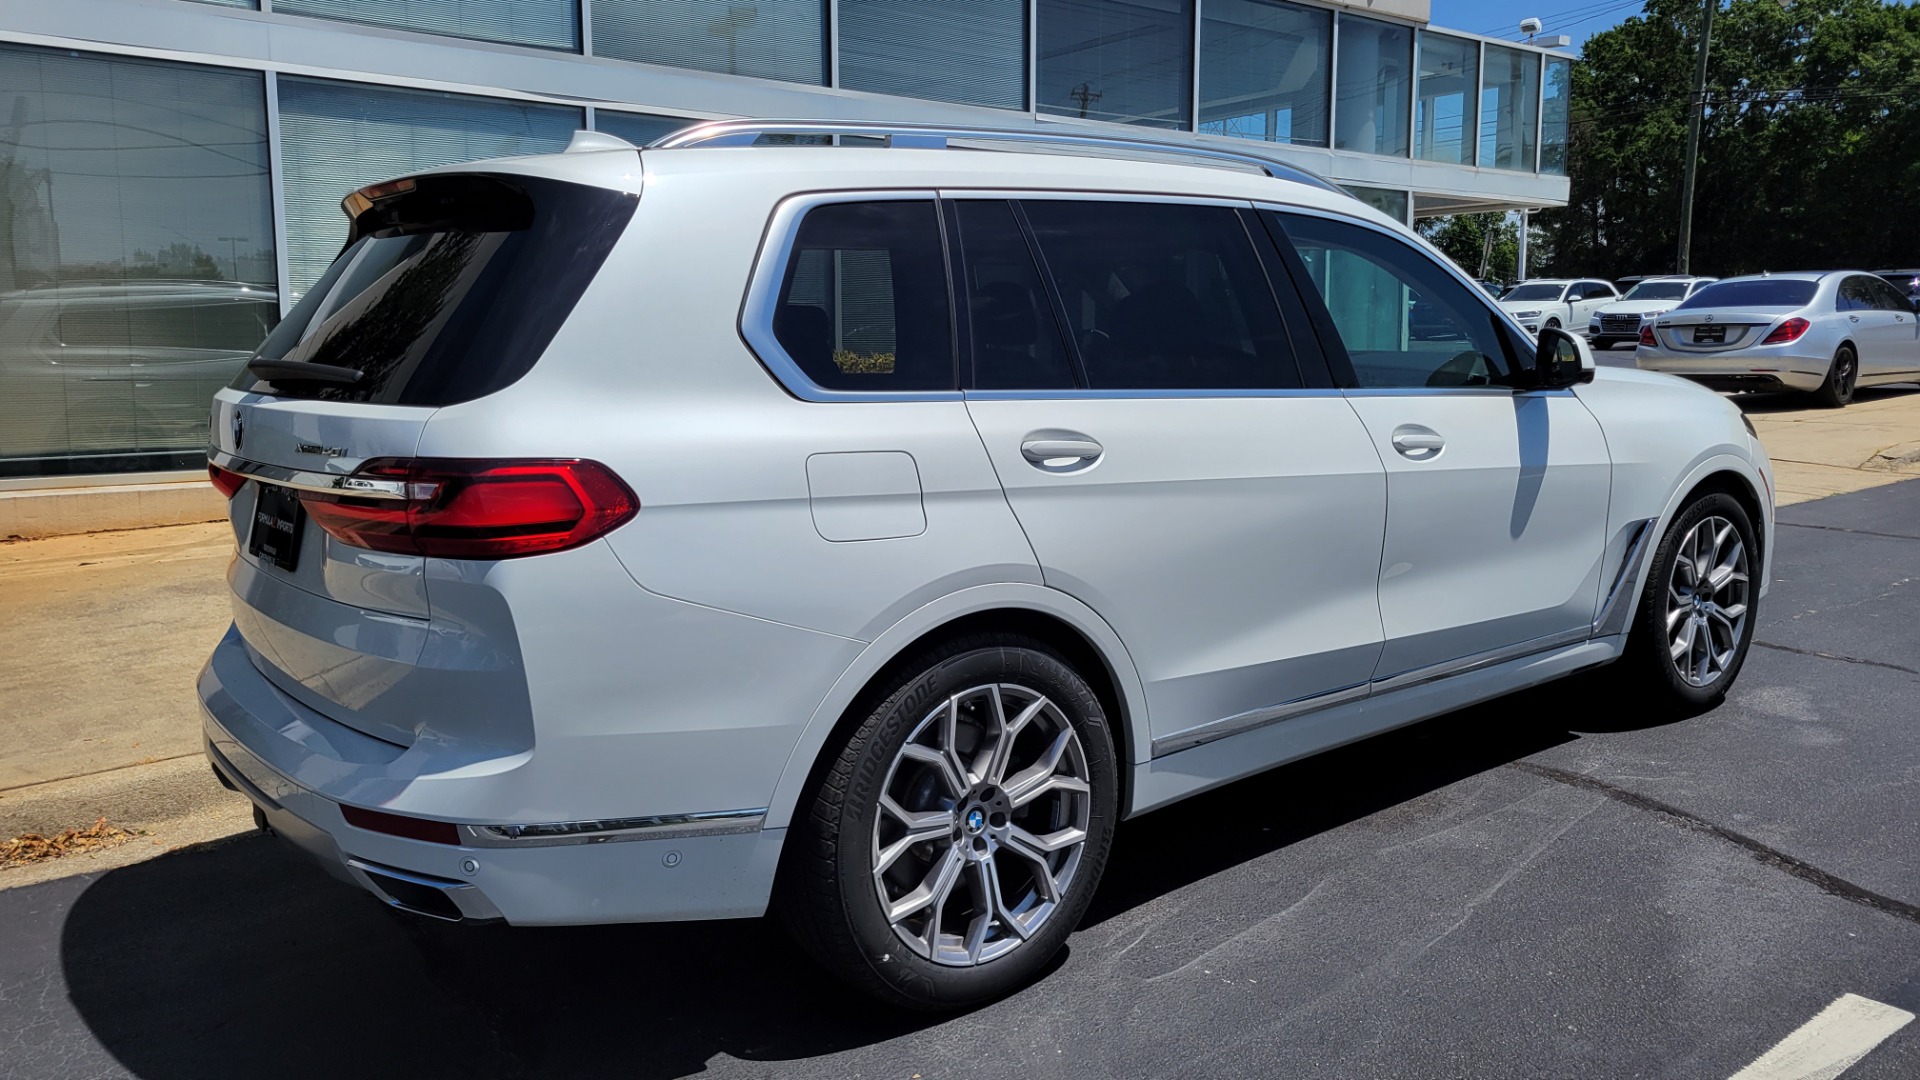 Used 2019 BMW X7 XDRIVE40I PREMIUM / NAV / HUD / PARK ASST PLUS / REMOTE START / 3D VIEW for sale $62,995 at Formula Imports in Charlotte NC 28227 7